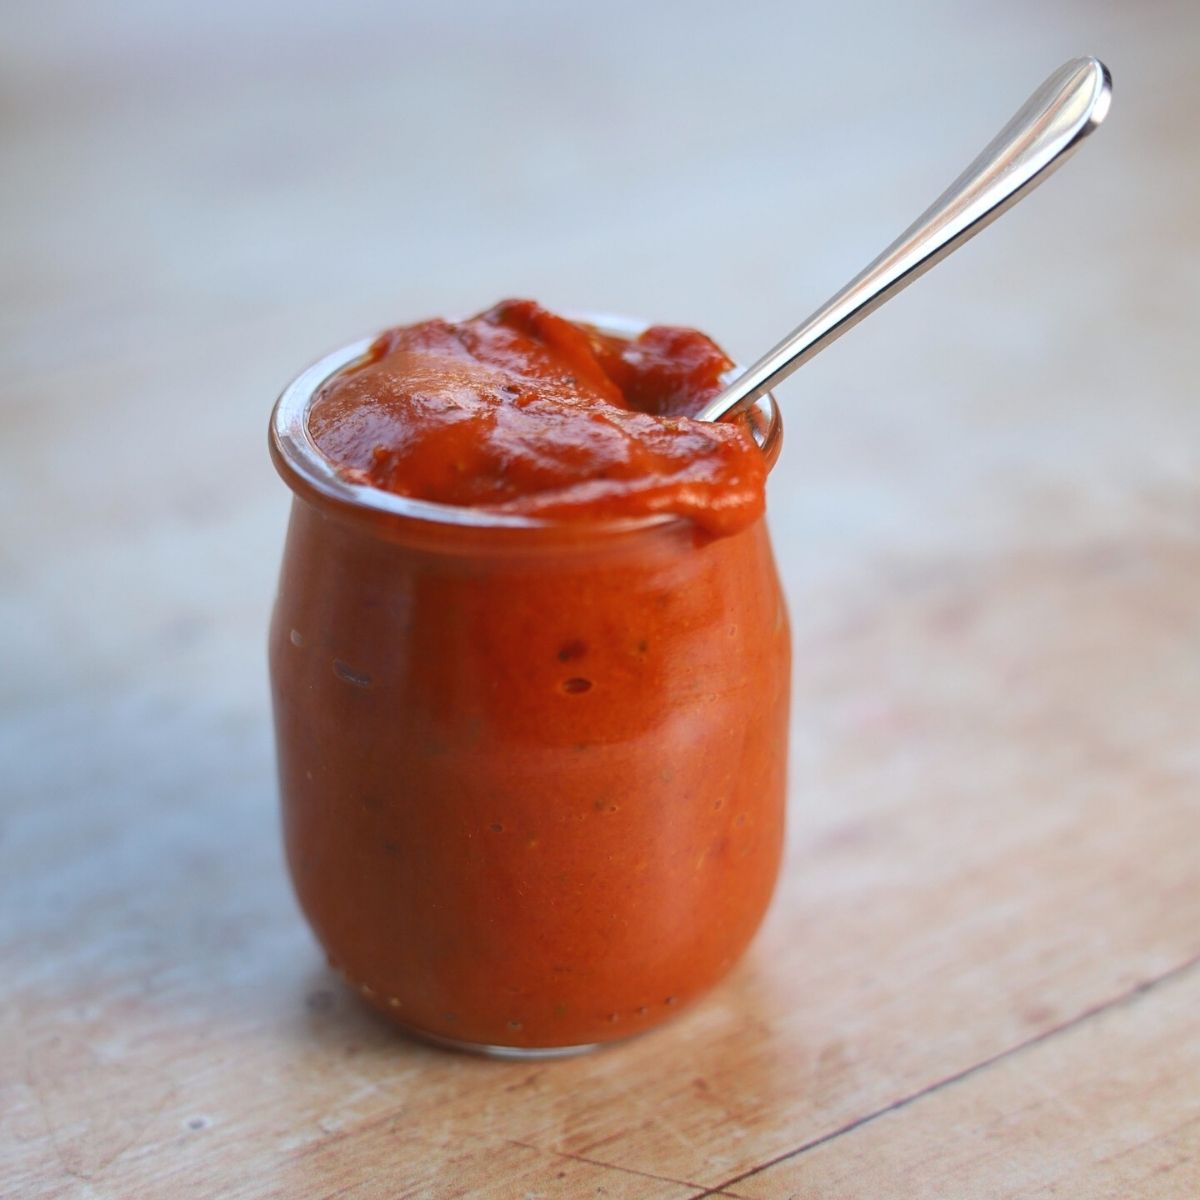 Red pepper dip in a glass jar with metal spoon.